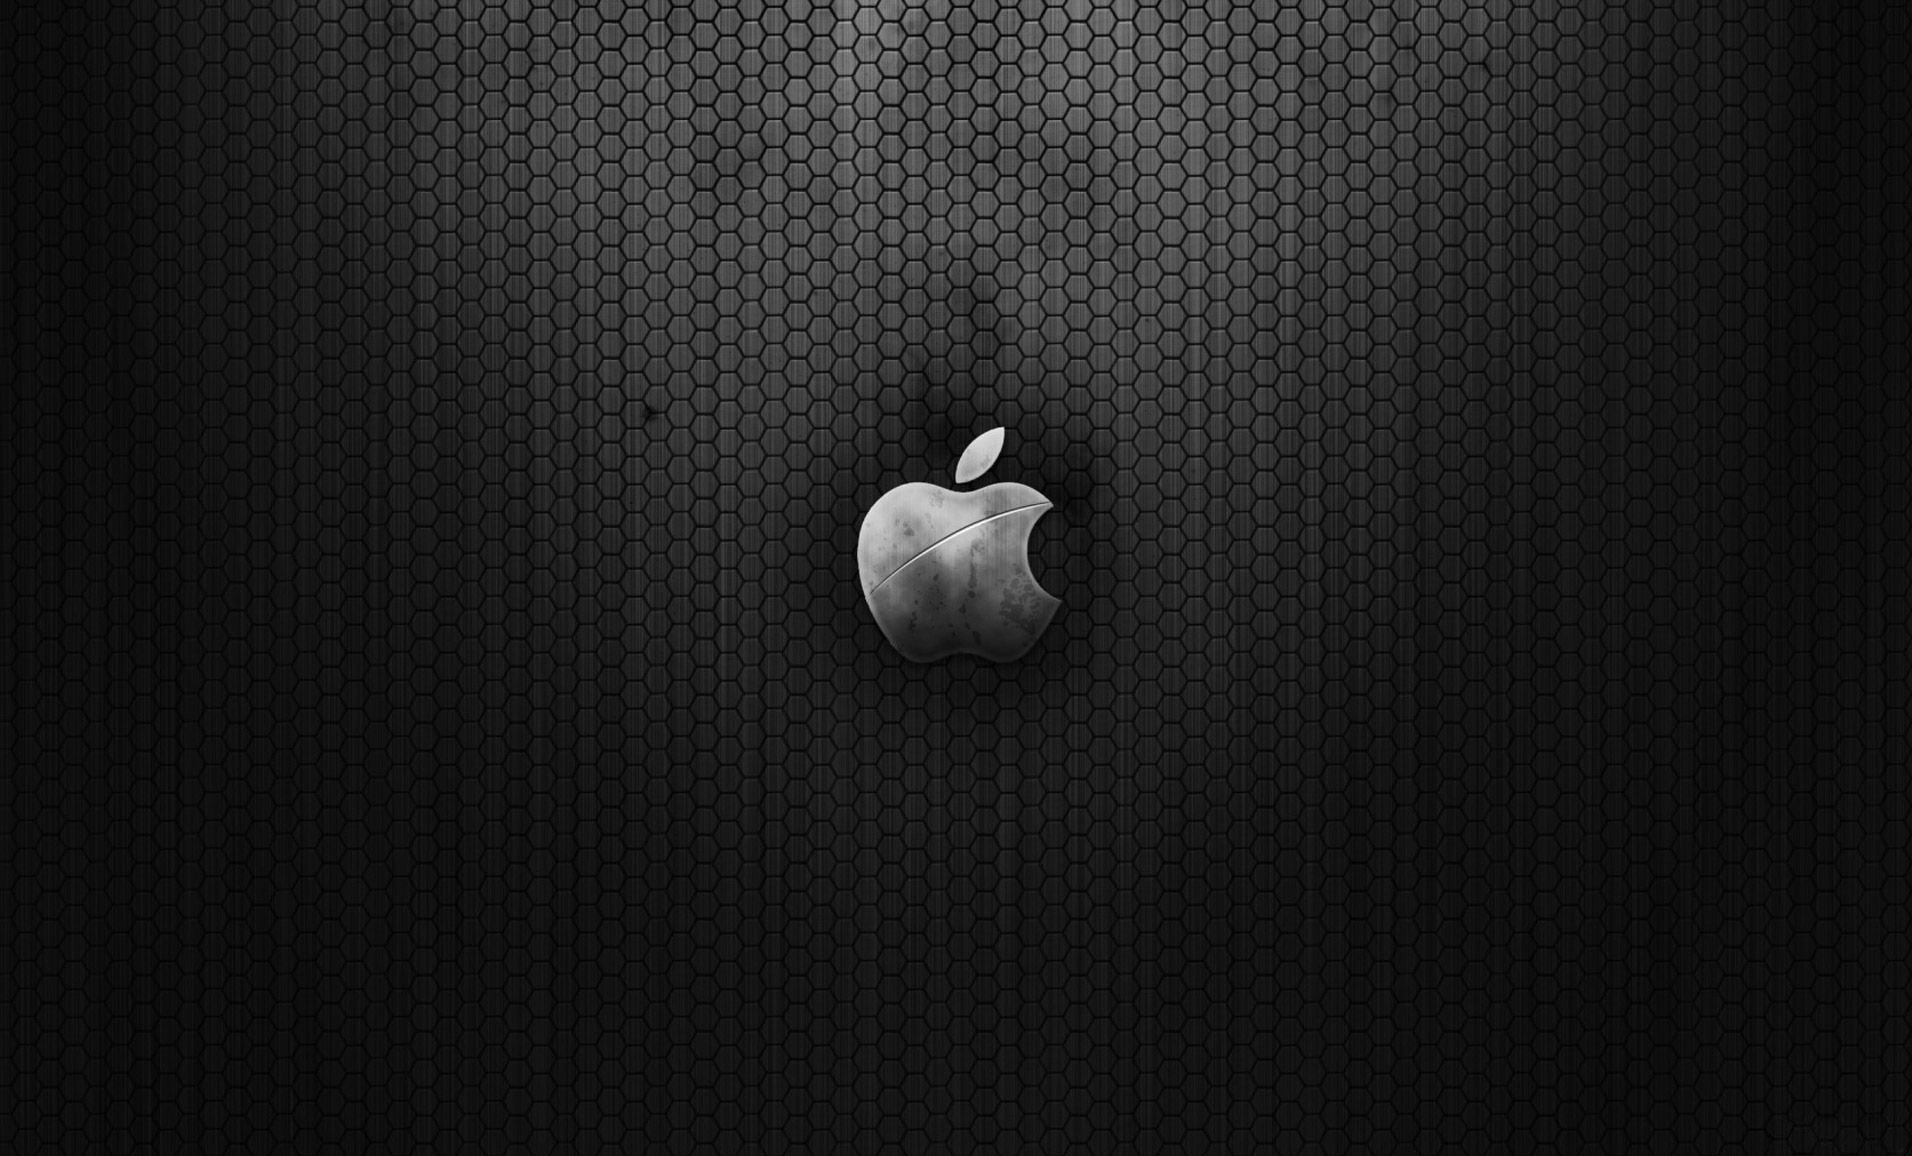 Apple Desktop Puter Image HD Wallpaper And Make This For